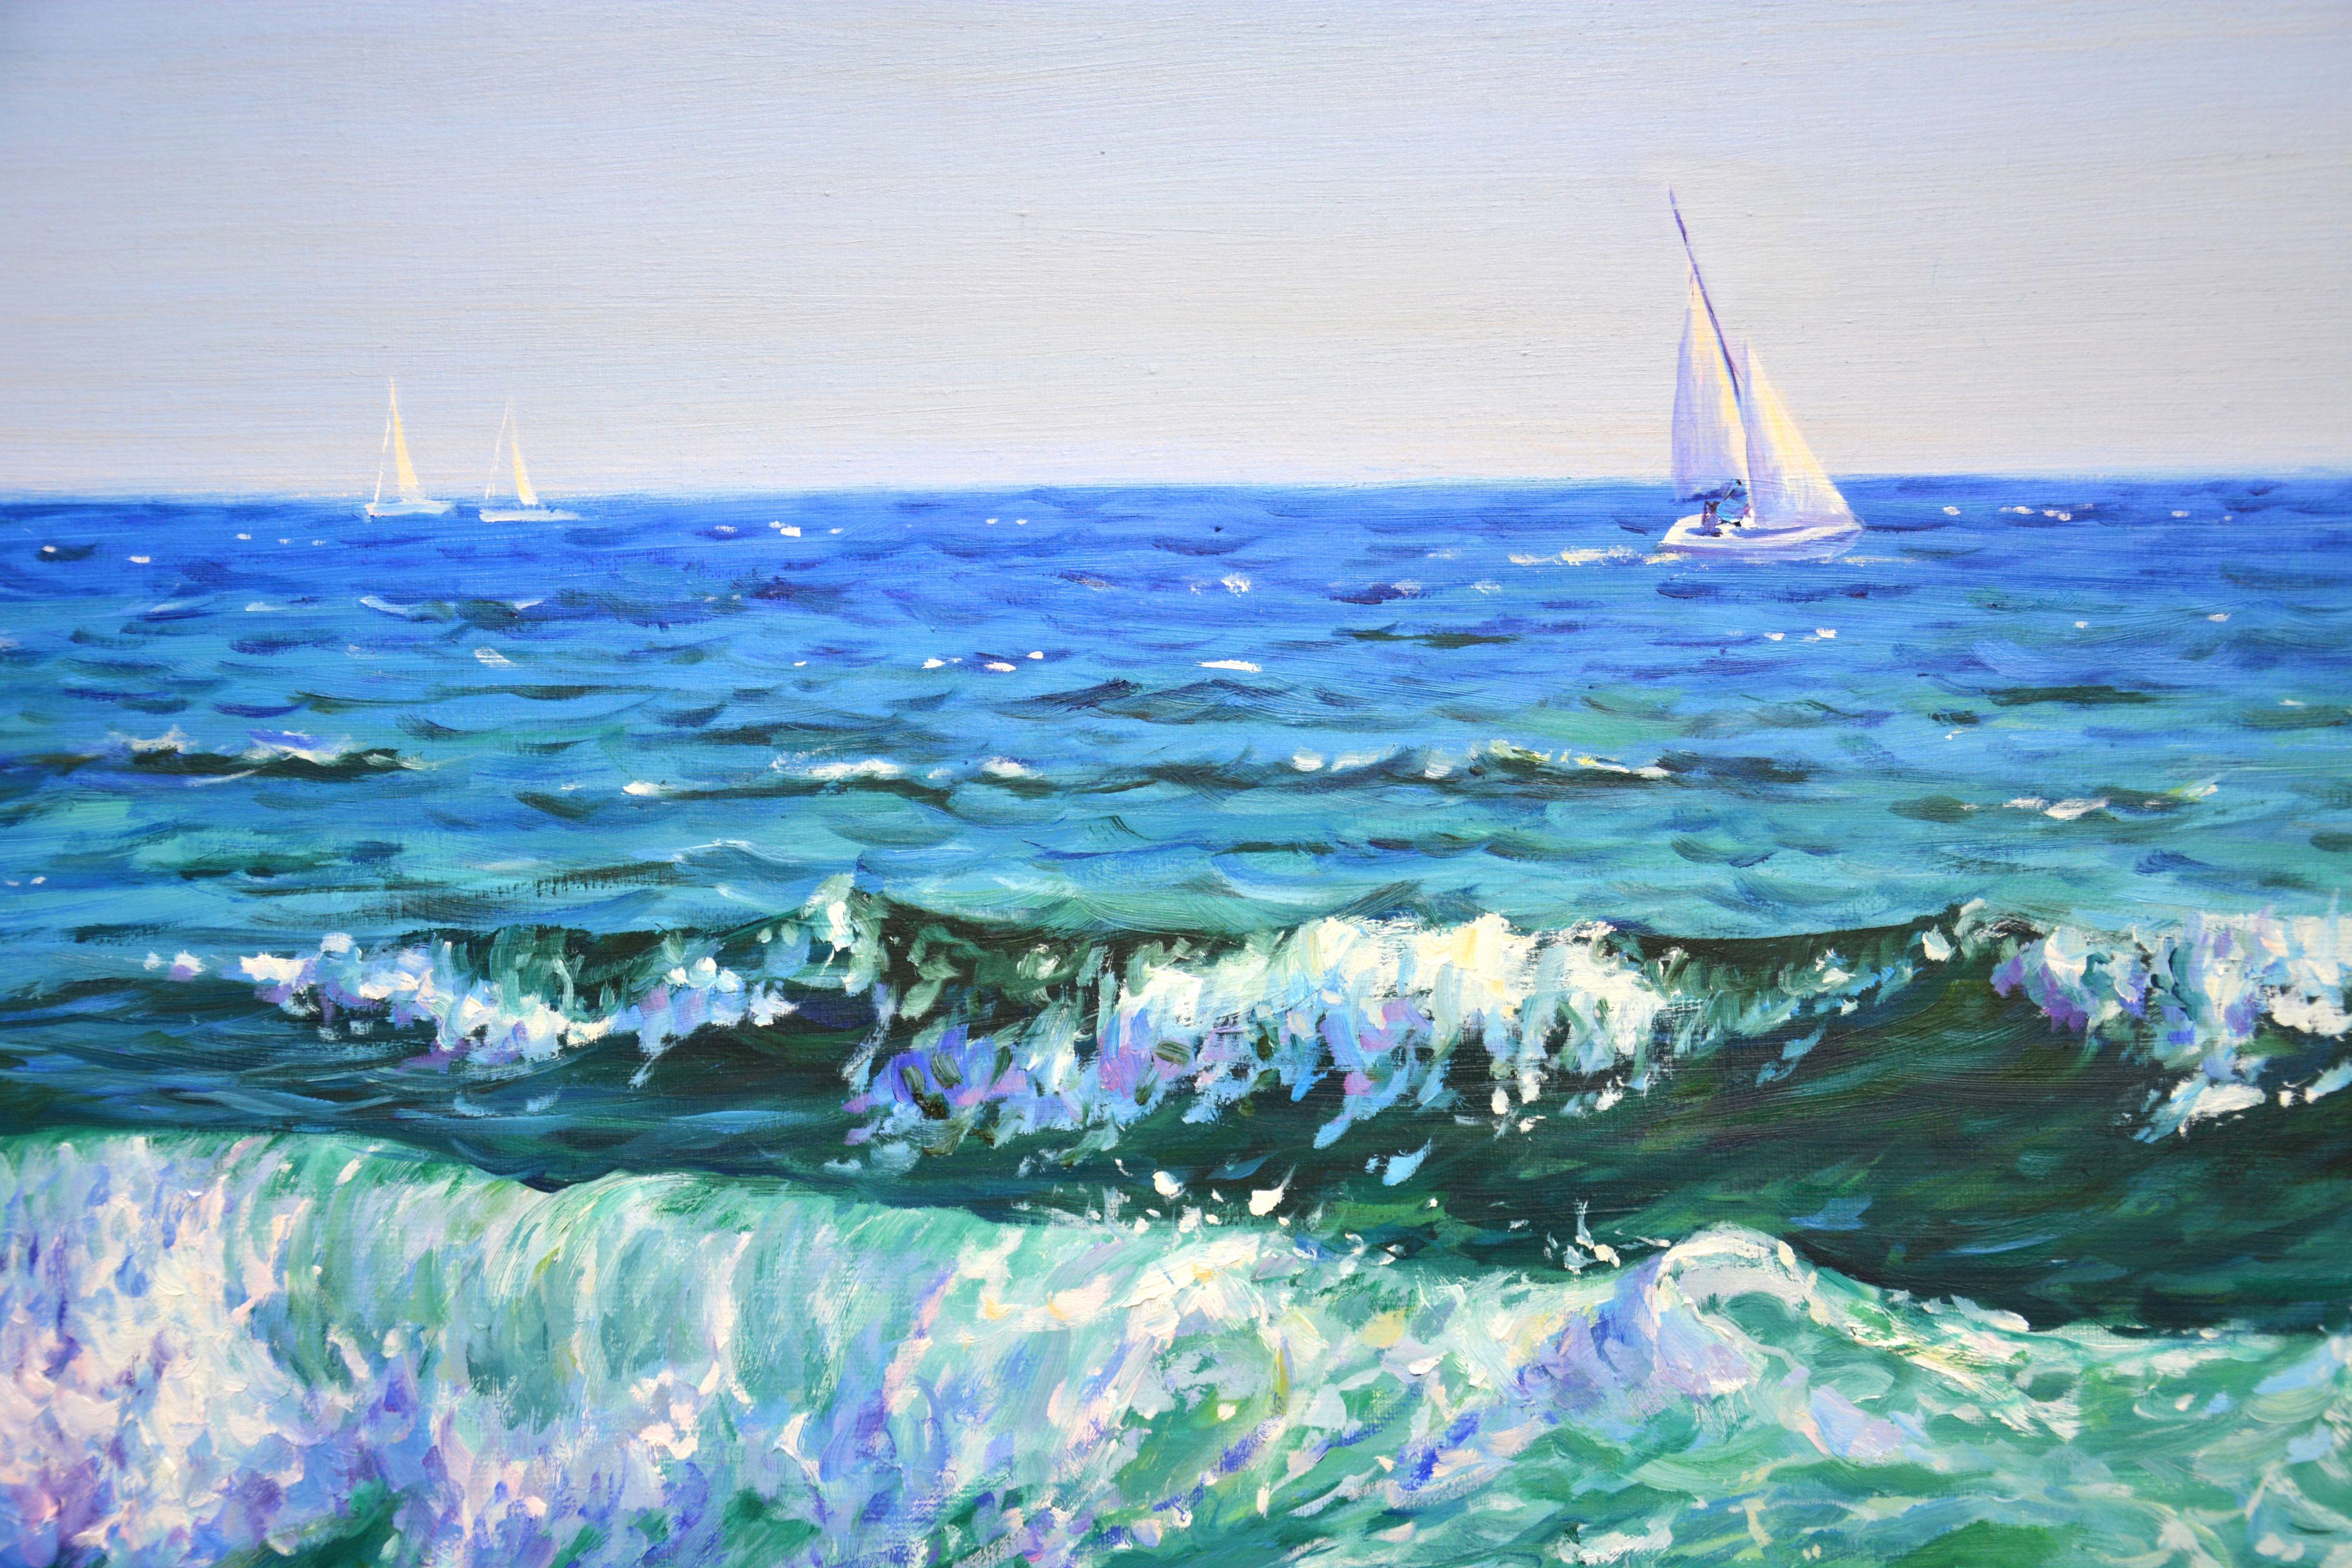 Impressionist scene with a day regatta. Stunning waves, luminous qualities of the ocean and stunning sky above your head, cause a feeling of love and gratitude to nature. While traveling I study a lot of the sea and the ocean. Then, in the workshop,